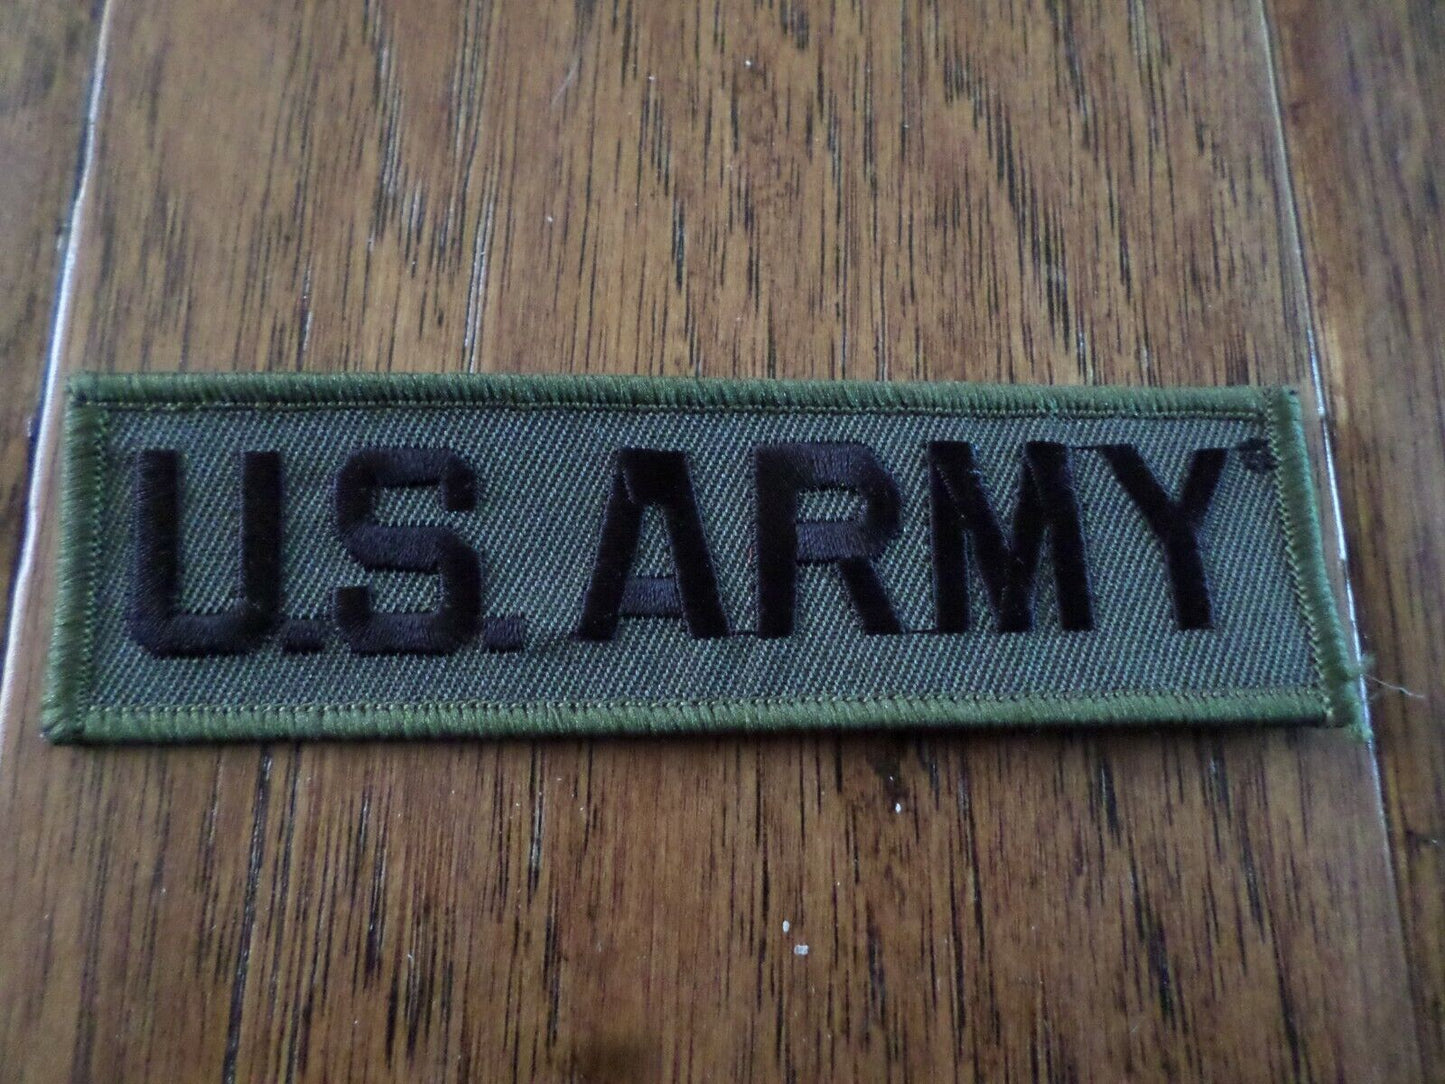 U.S Army Uniform Tape Patch Name Tag Chest Breast Tab Embroidered Insignia